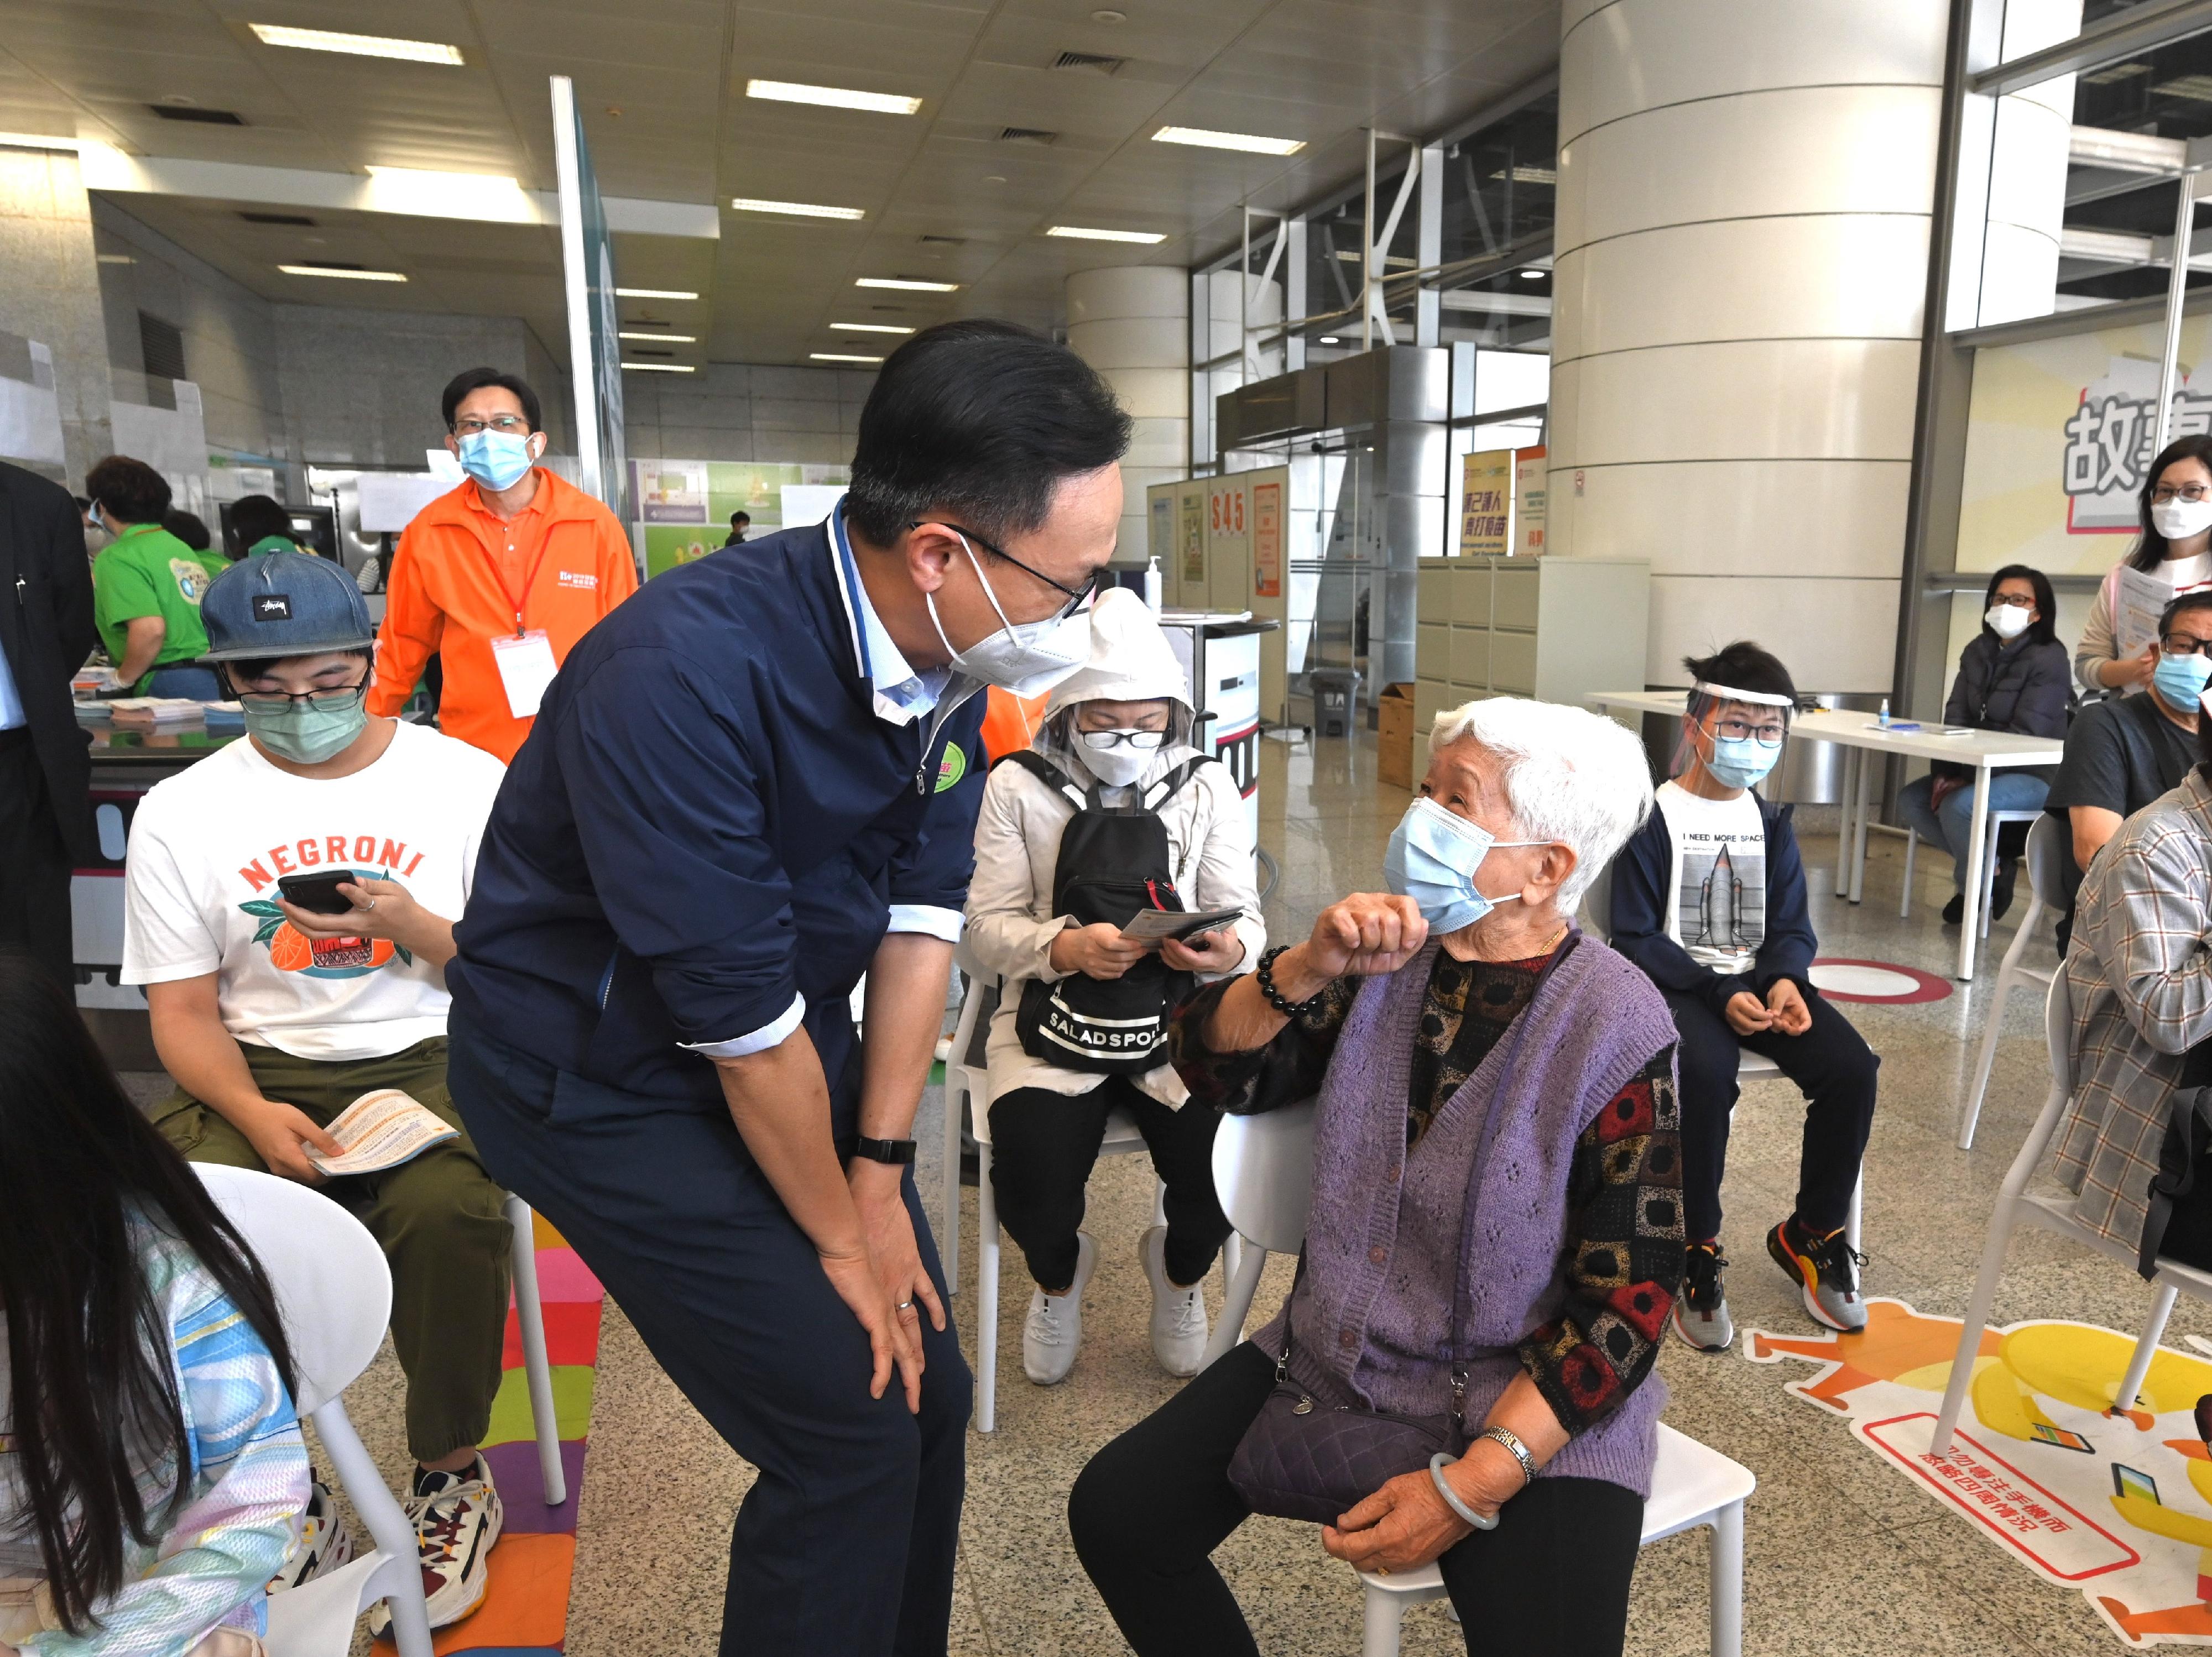 The Secretary for the Civil Service, Mr Patrick Nip, today (March 12) went to Tsing Yi to inspect the operation of the MTR Tsing Yi Station Community Vaccination Centre. Photo shows Mr Nip (front row, left) chatting with a member of the public who is waiting to get vaccinated.